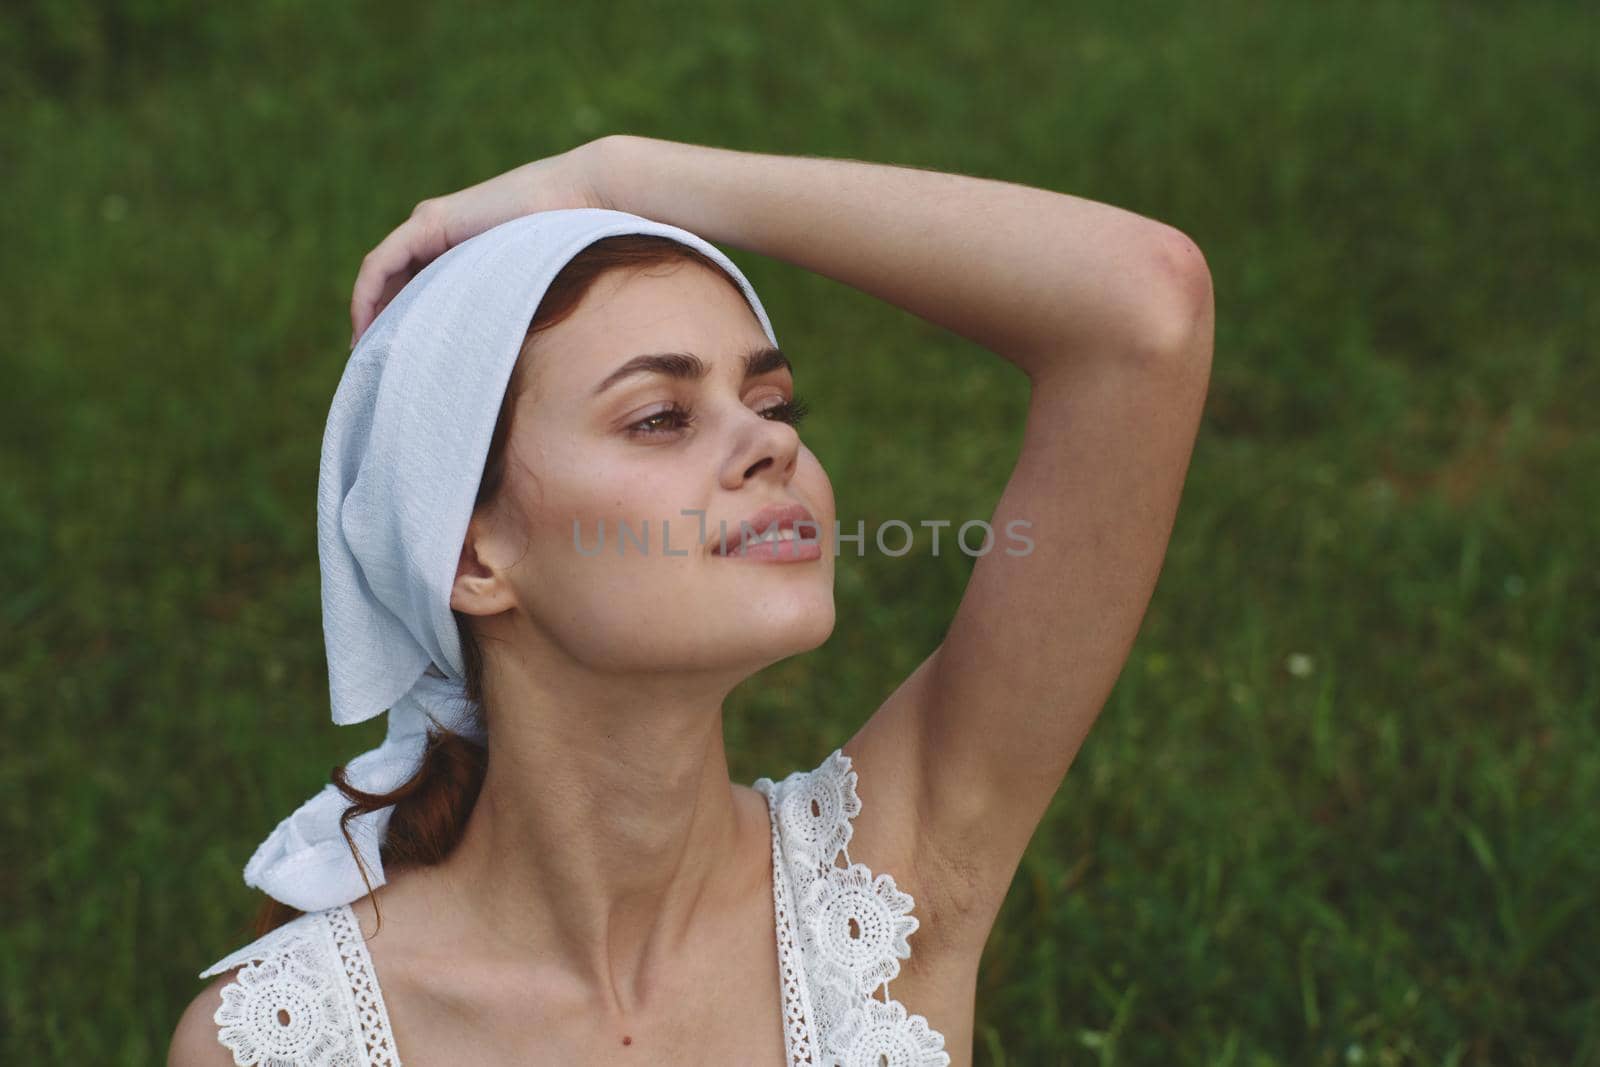 cheerful woman outdoors in the garden countryside ecology nature. High quality photo